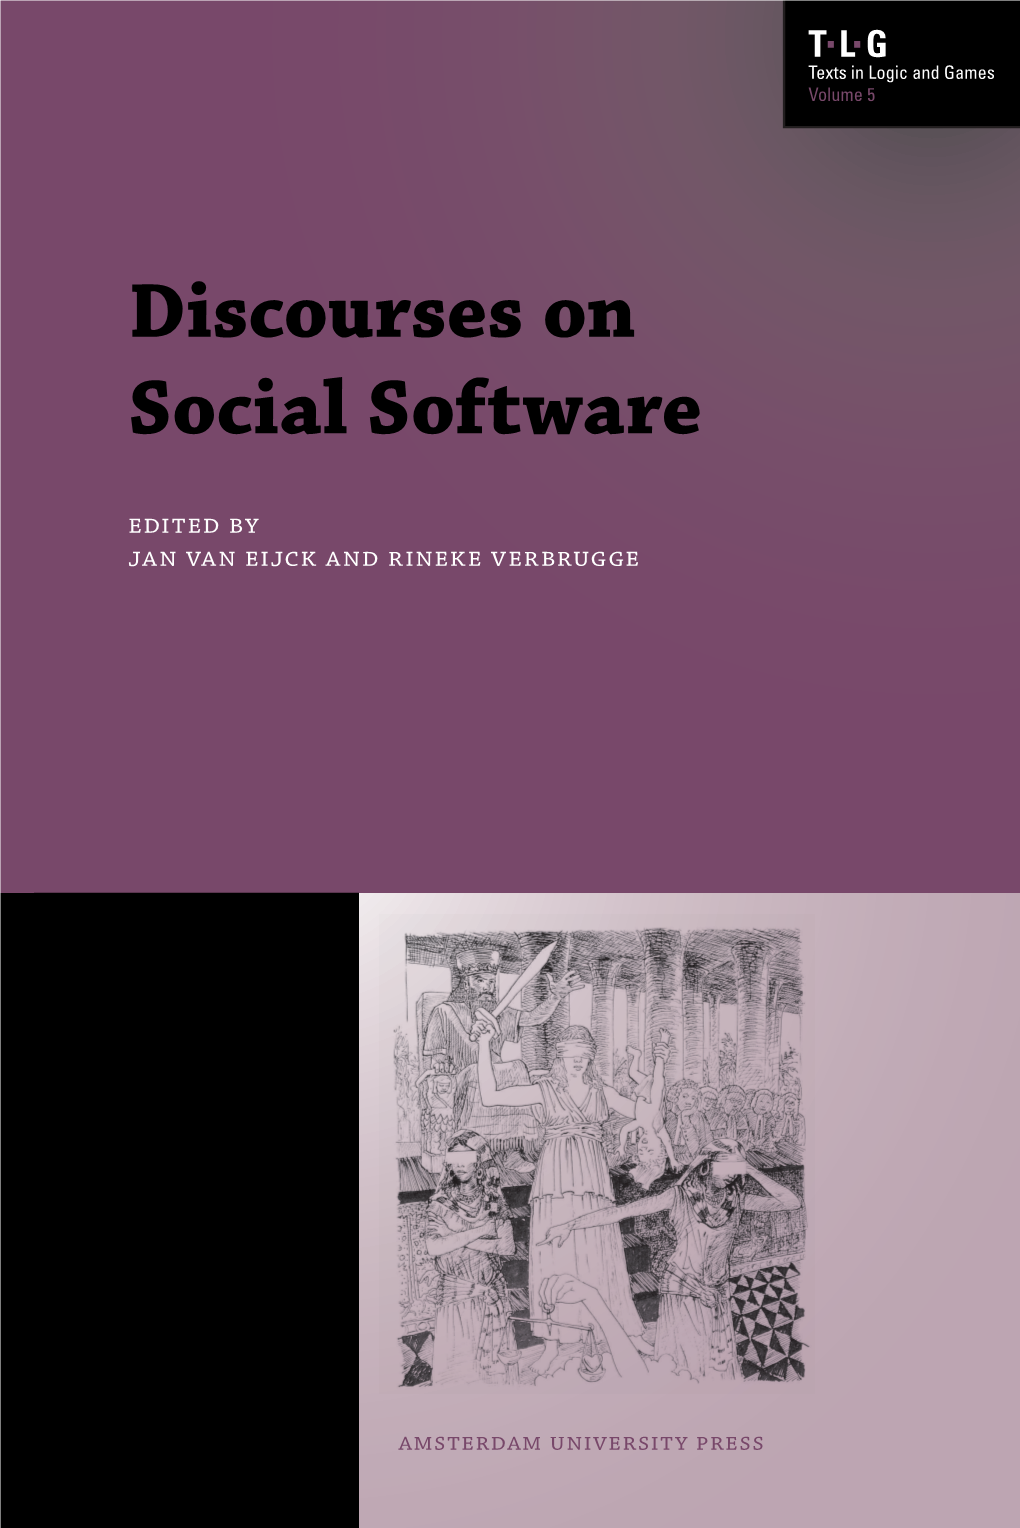 Discourses on Social Software Sheds Light on These and Similar Questions